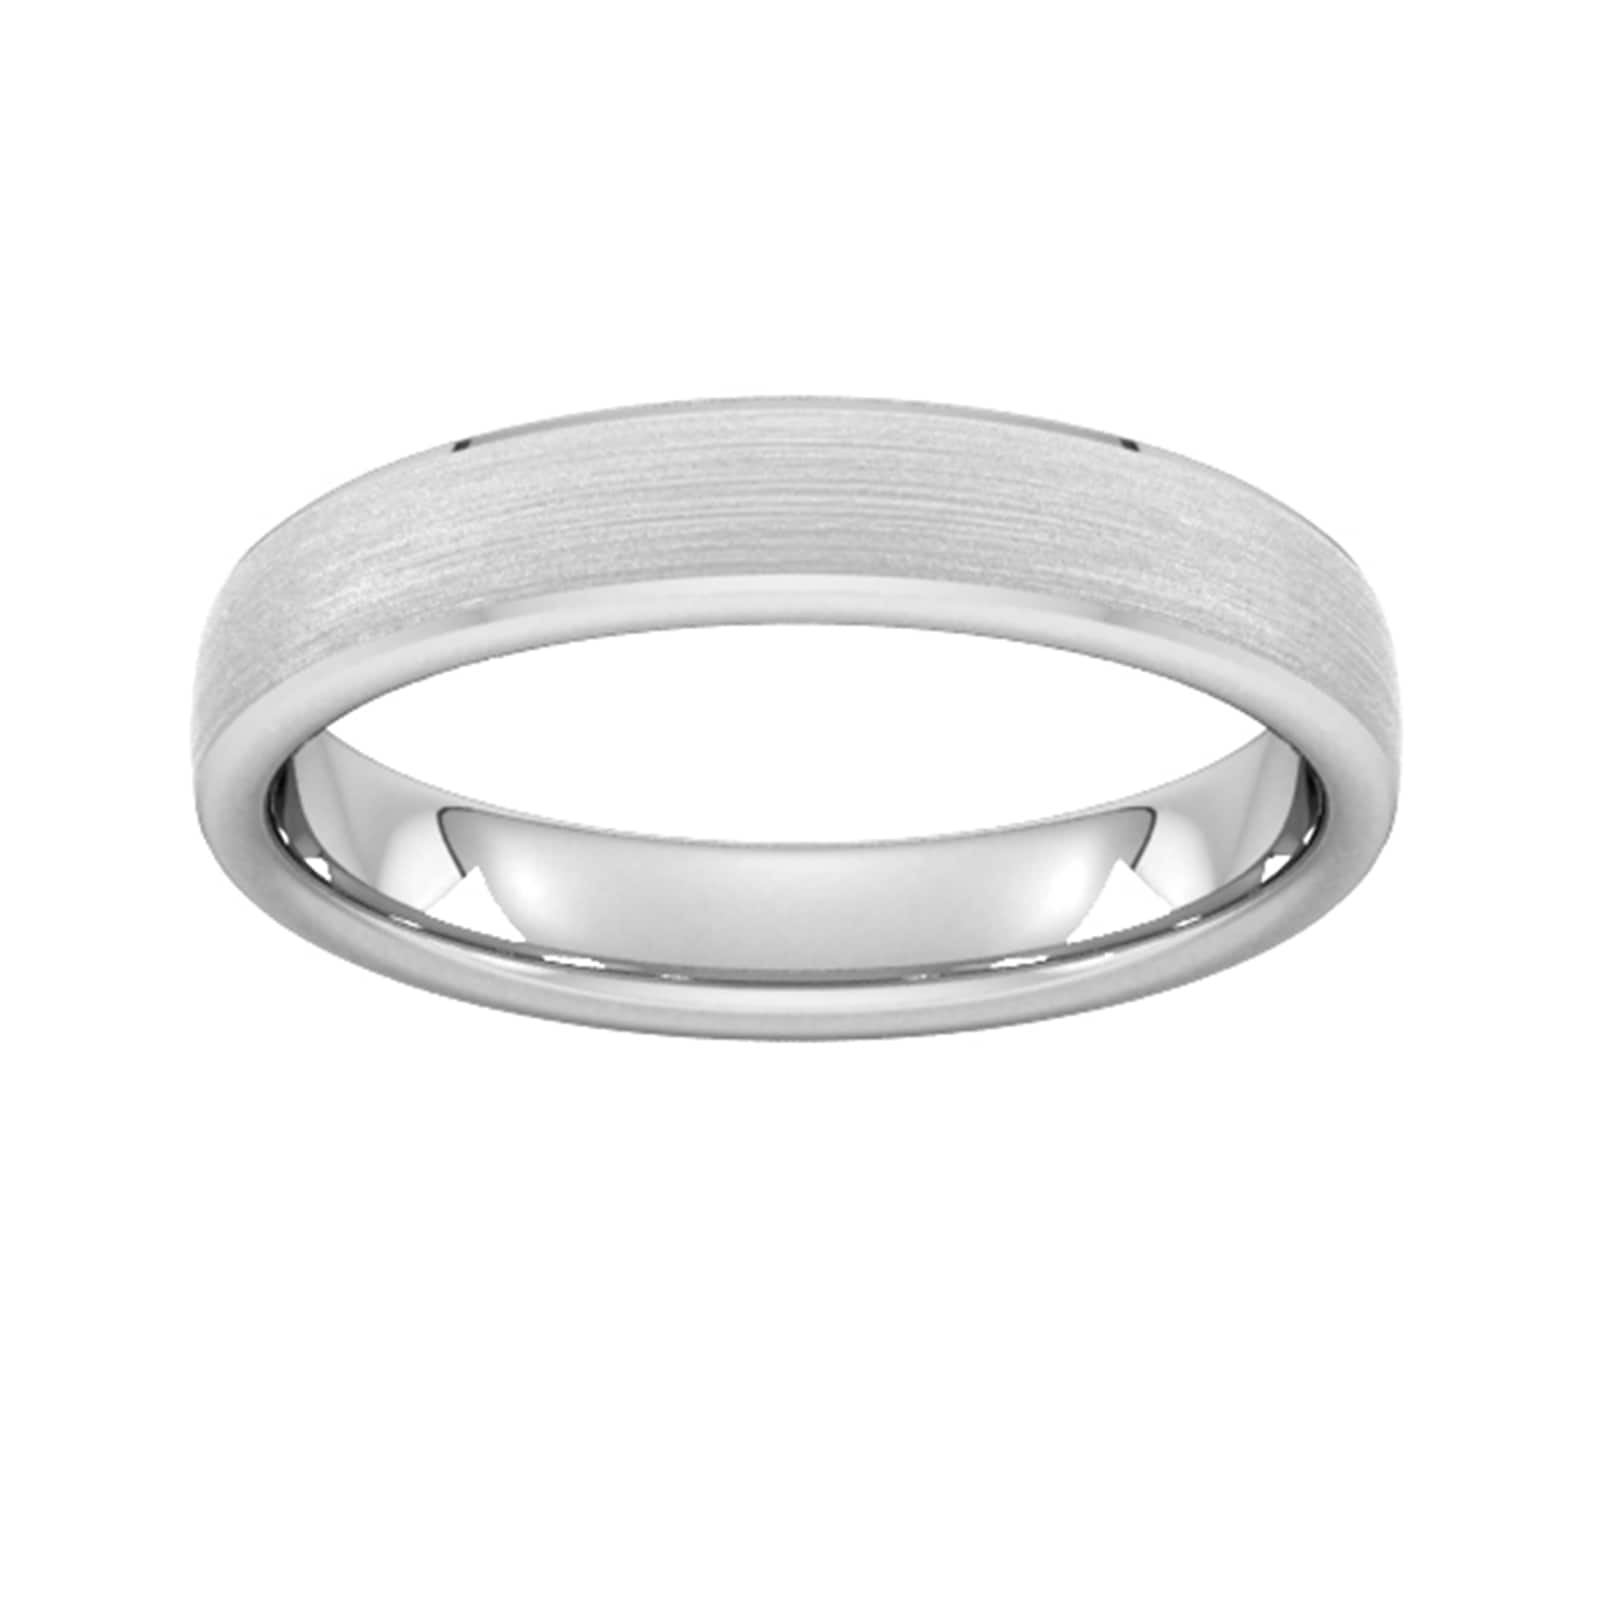 4mm Slight Court Extra Heavy Polished Chamfered Edges With Matt Centre Wedding Ring In 18 Carat White Gold - Ring Size K